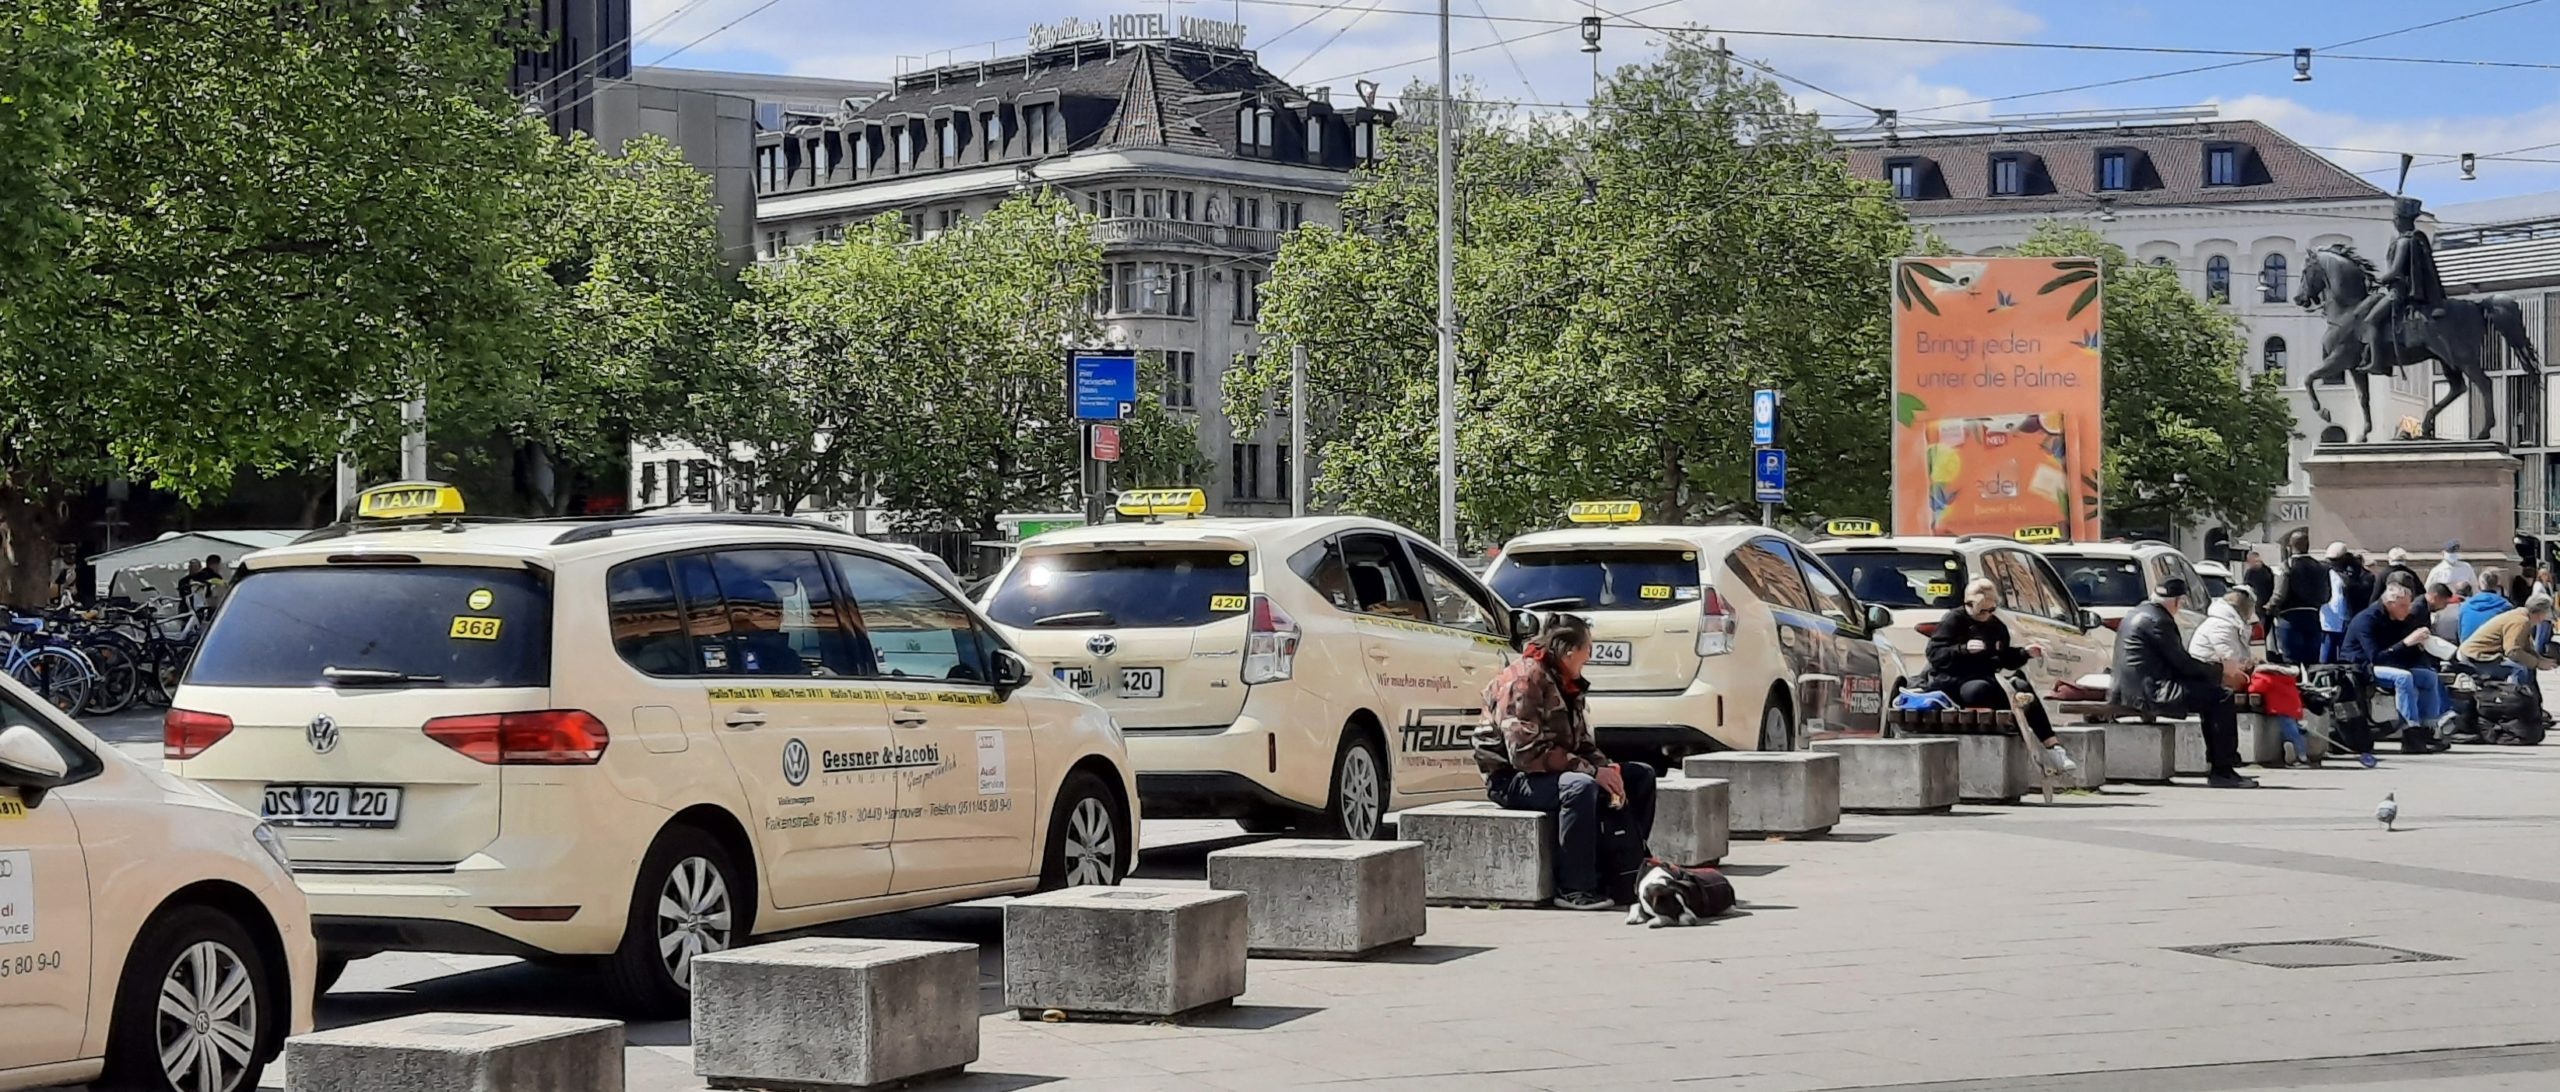 Taxi: Taxicab service in Hanover, Germany. 2560x1100 Dual Screen Background.